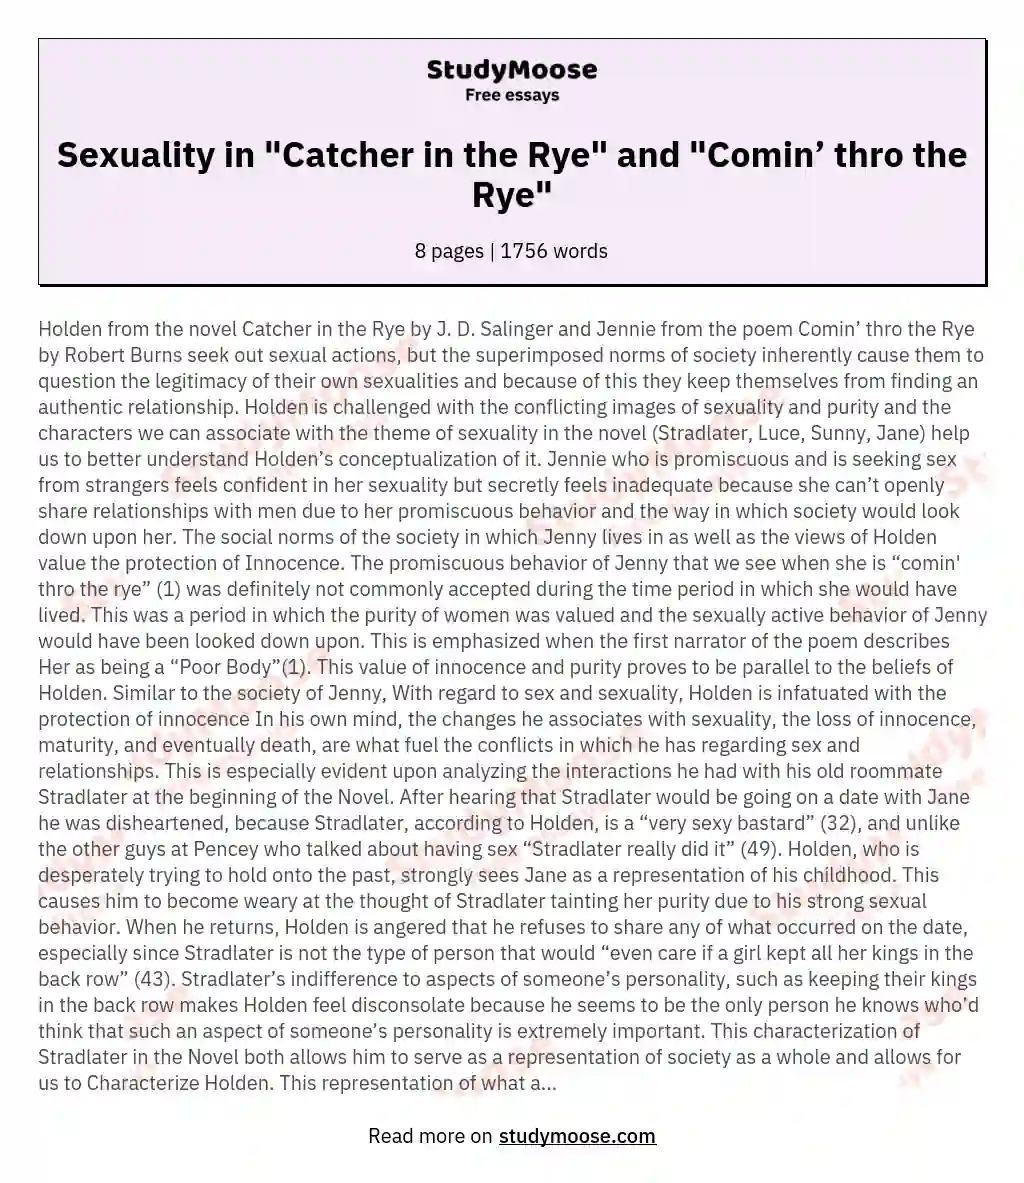 Sexuality in "Catcher in the Rye" and "Comin’ thro the Rye" essay